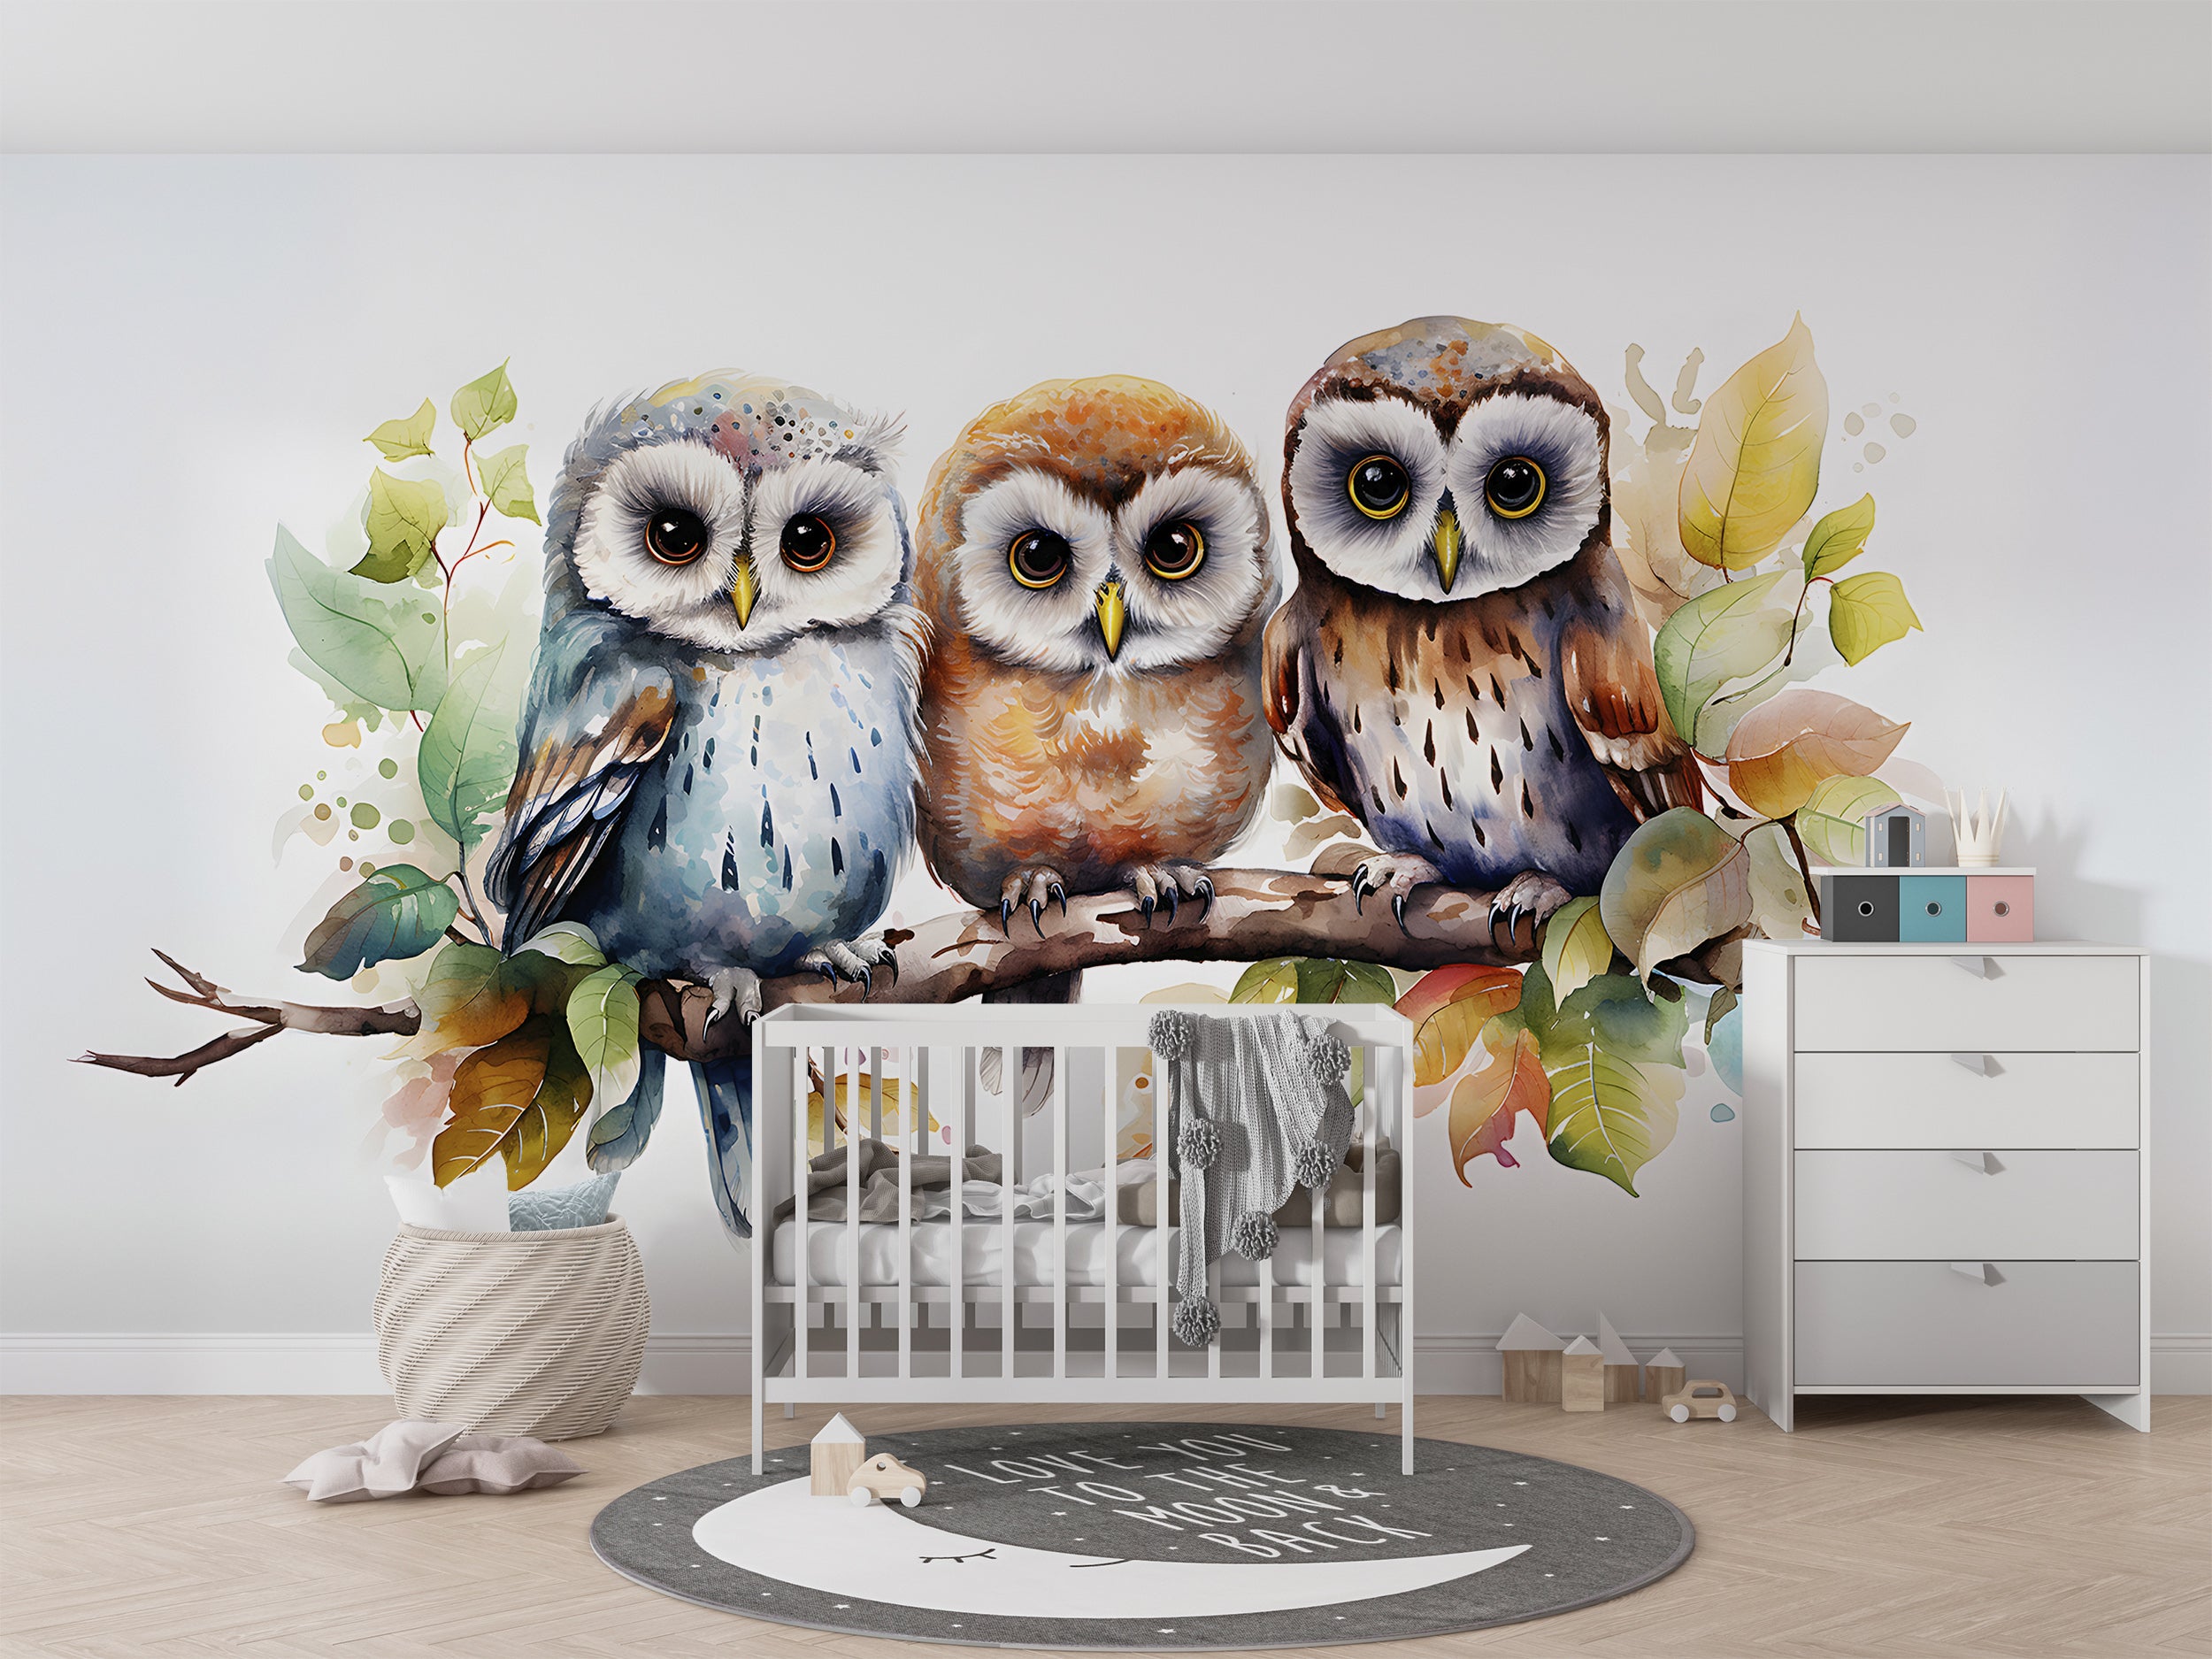 Removable Woodland Owl Wall Decoration